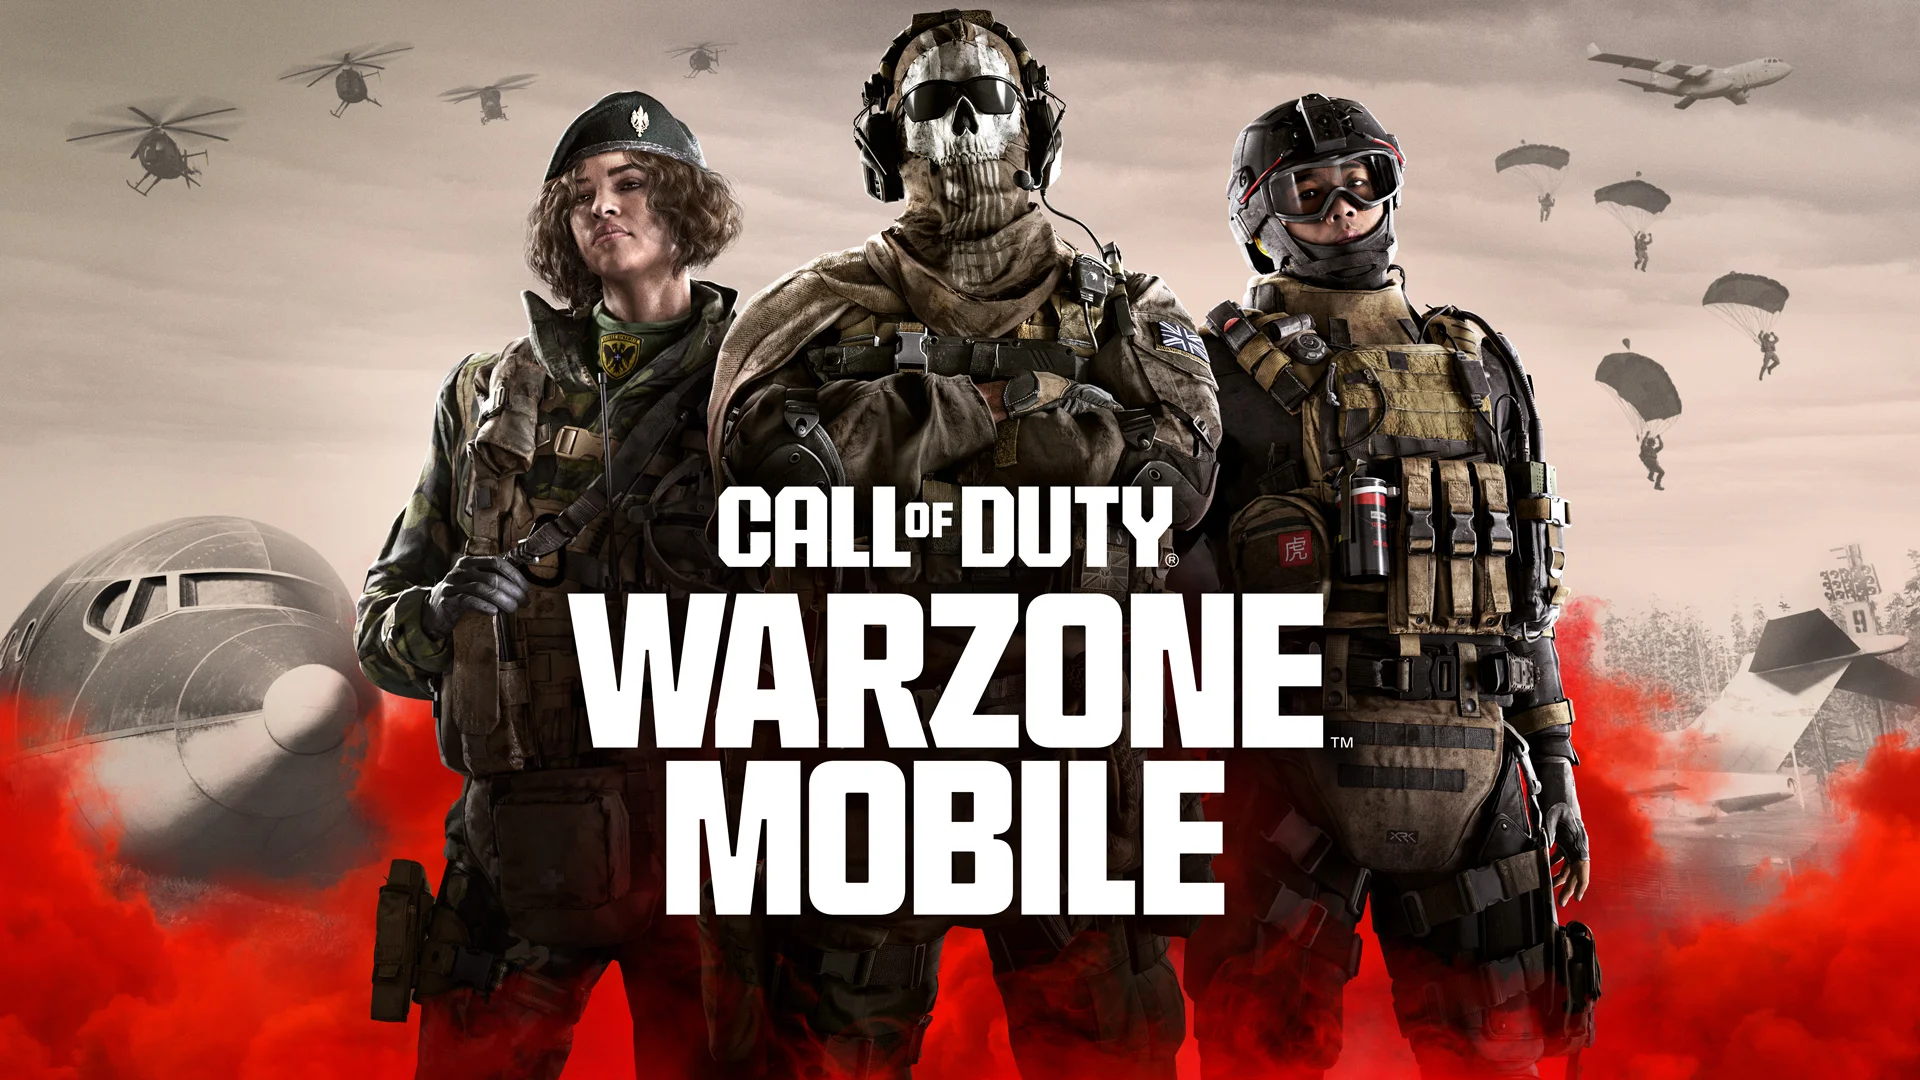 The release date for mobile Call of Duty: Warzone has been announced